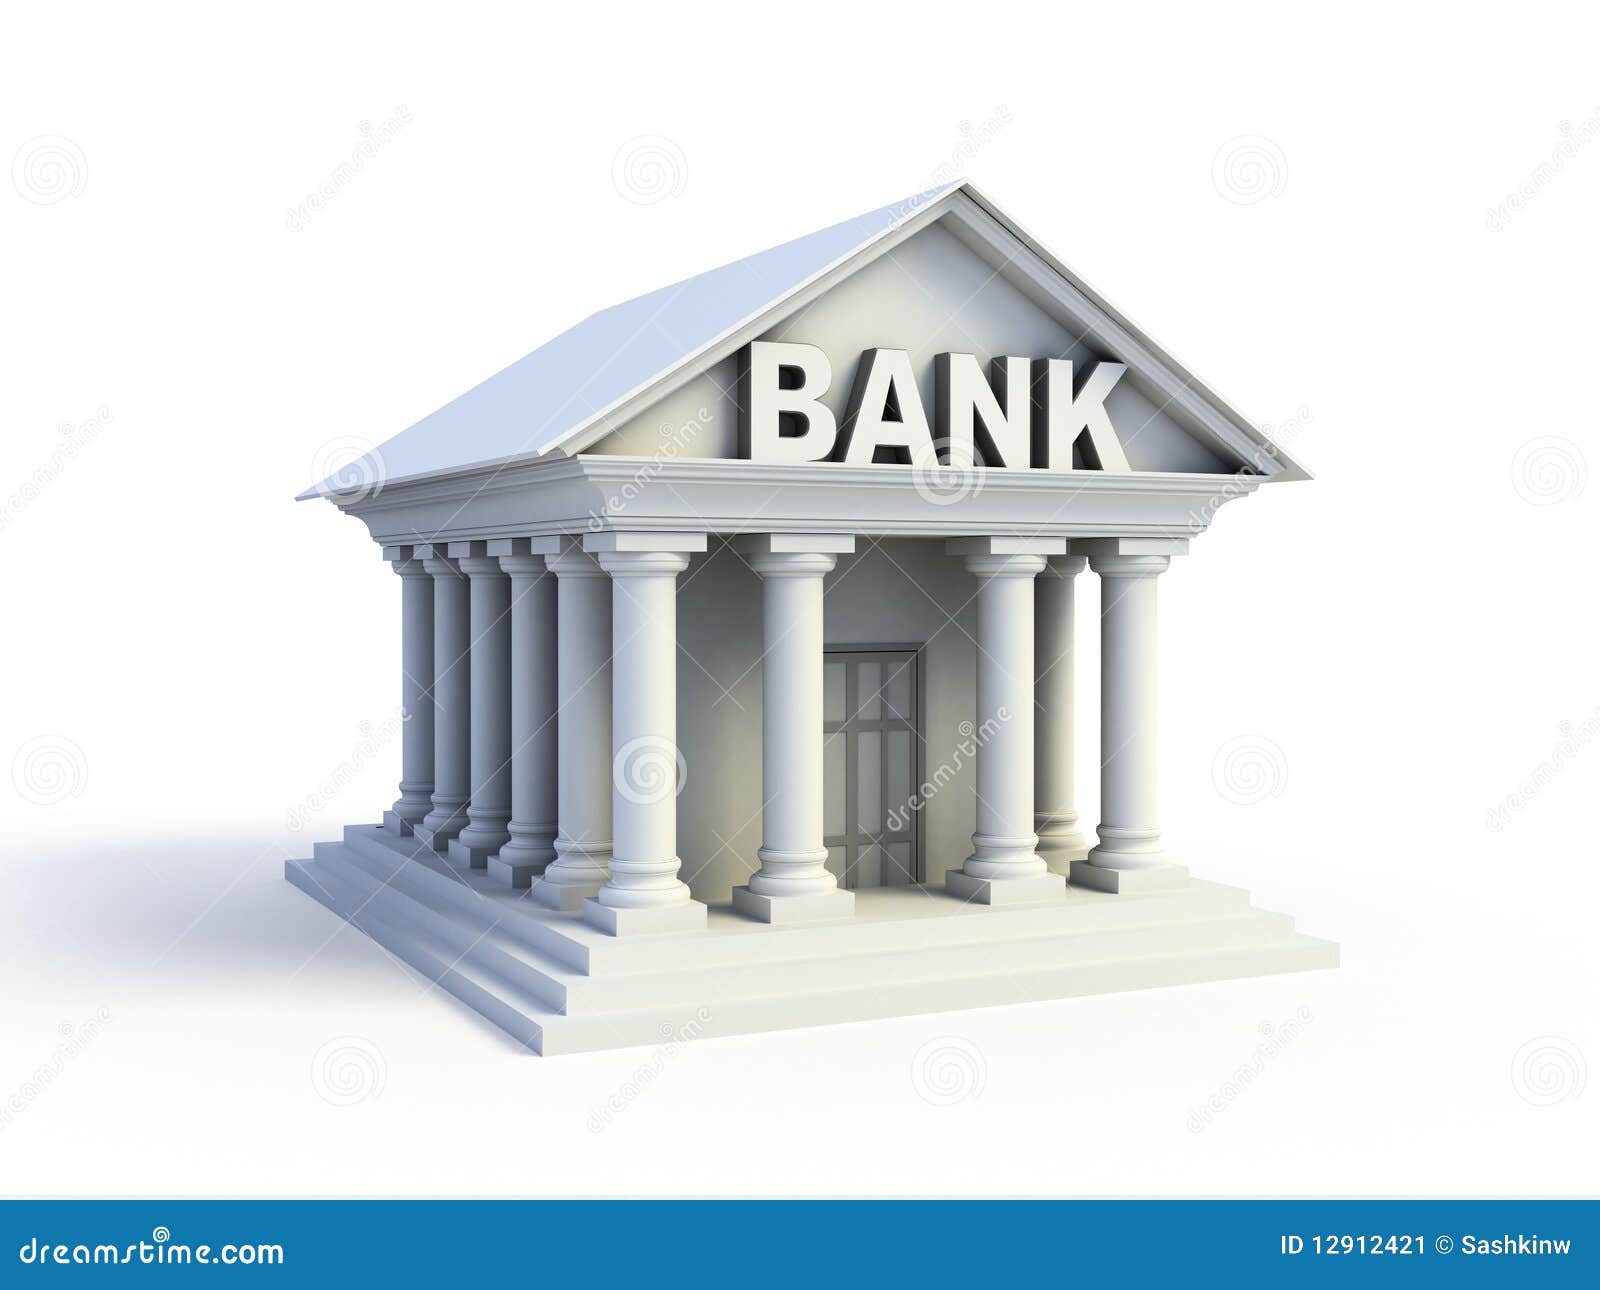 clipart of bank - photo #49